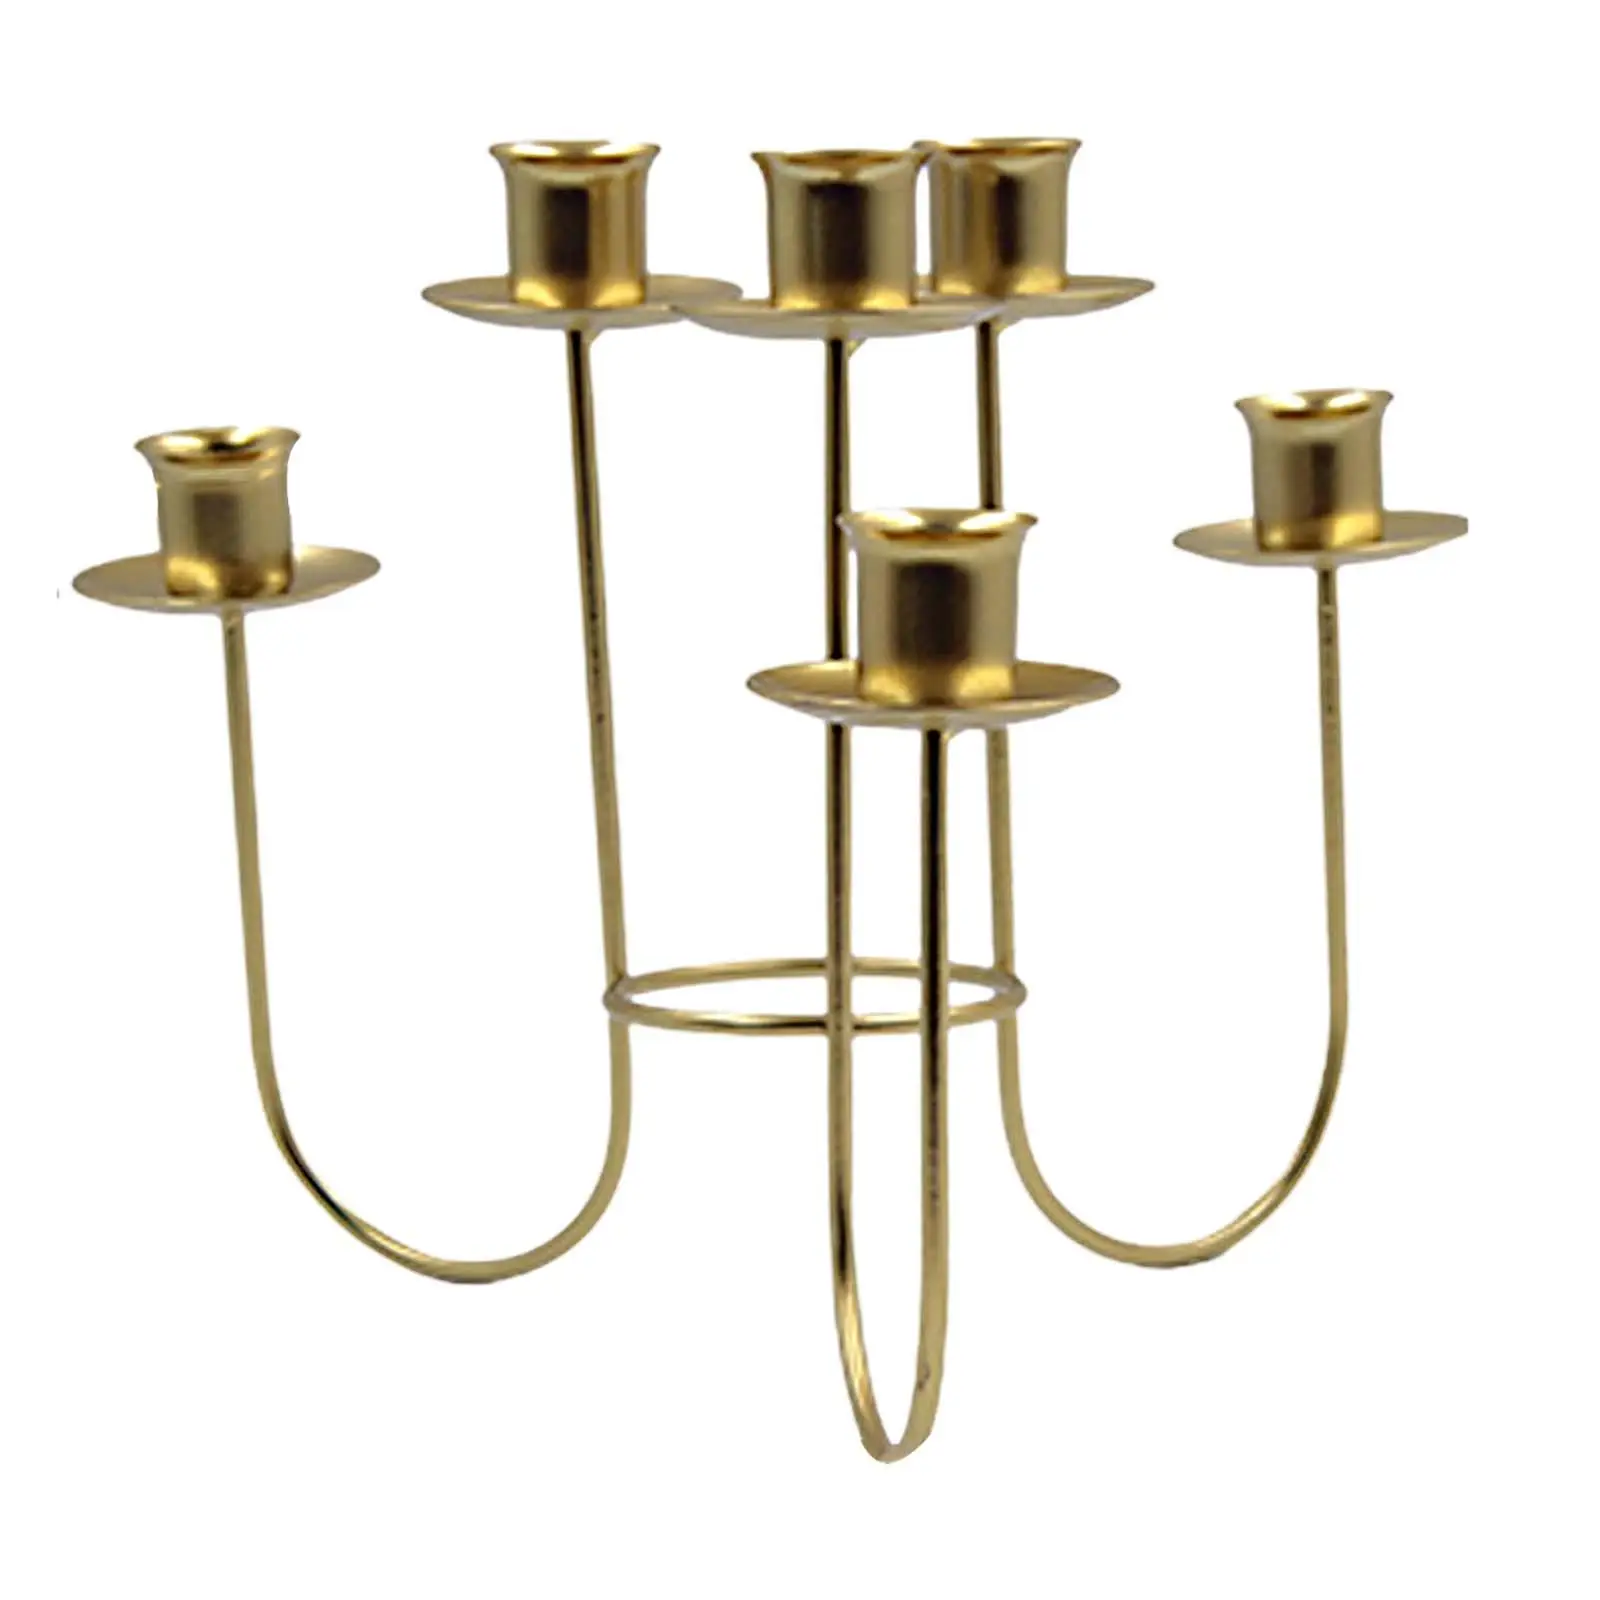 Multi Arms Metal Candle Holder Candle Stand 10x8inch Decorative Iron Art Table